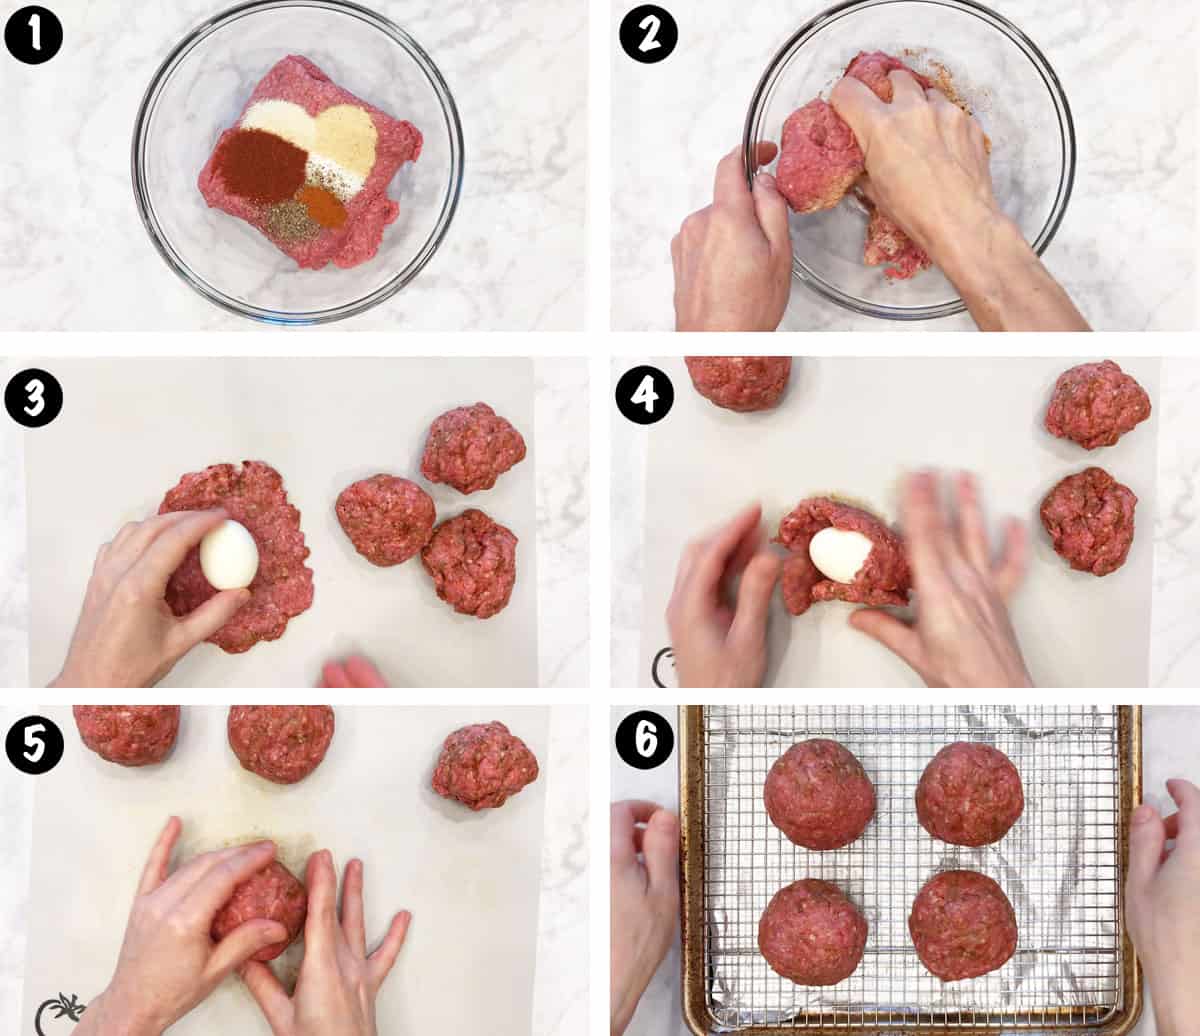 A photo collage showing steps 1-6 for making Scotch eggs.